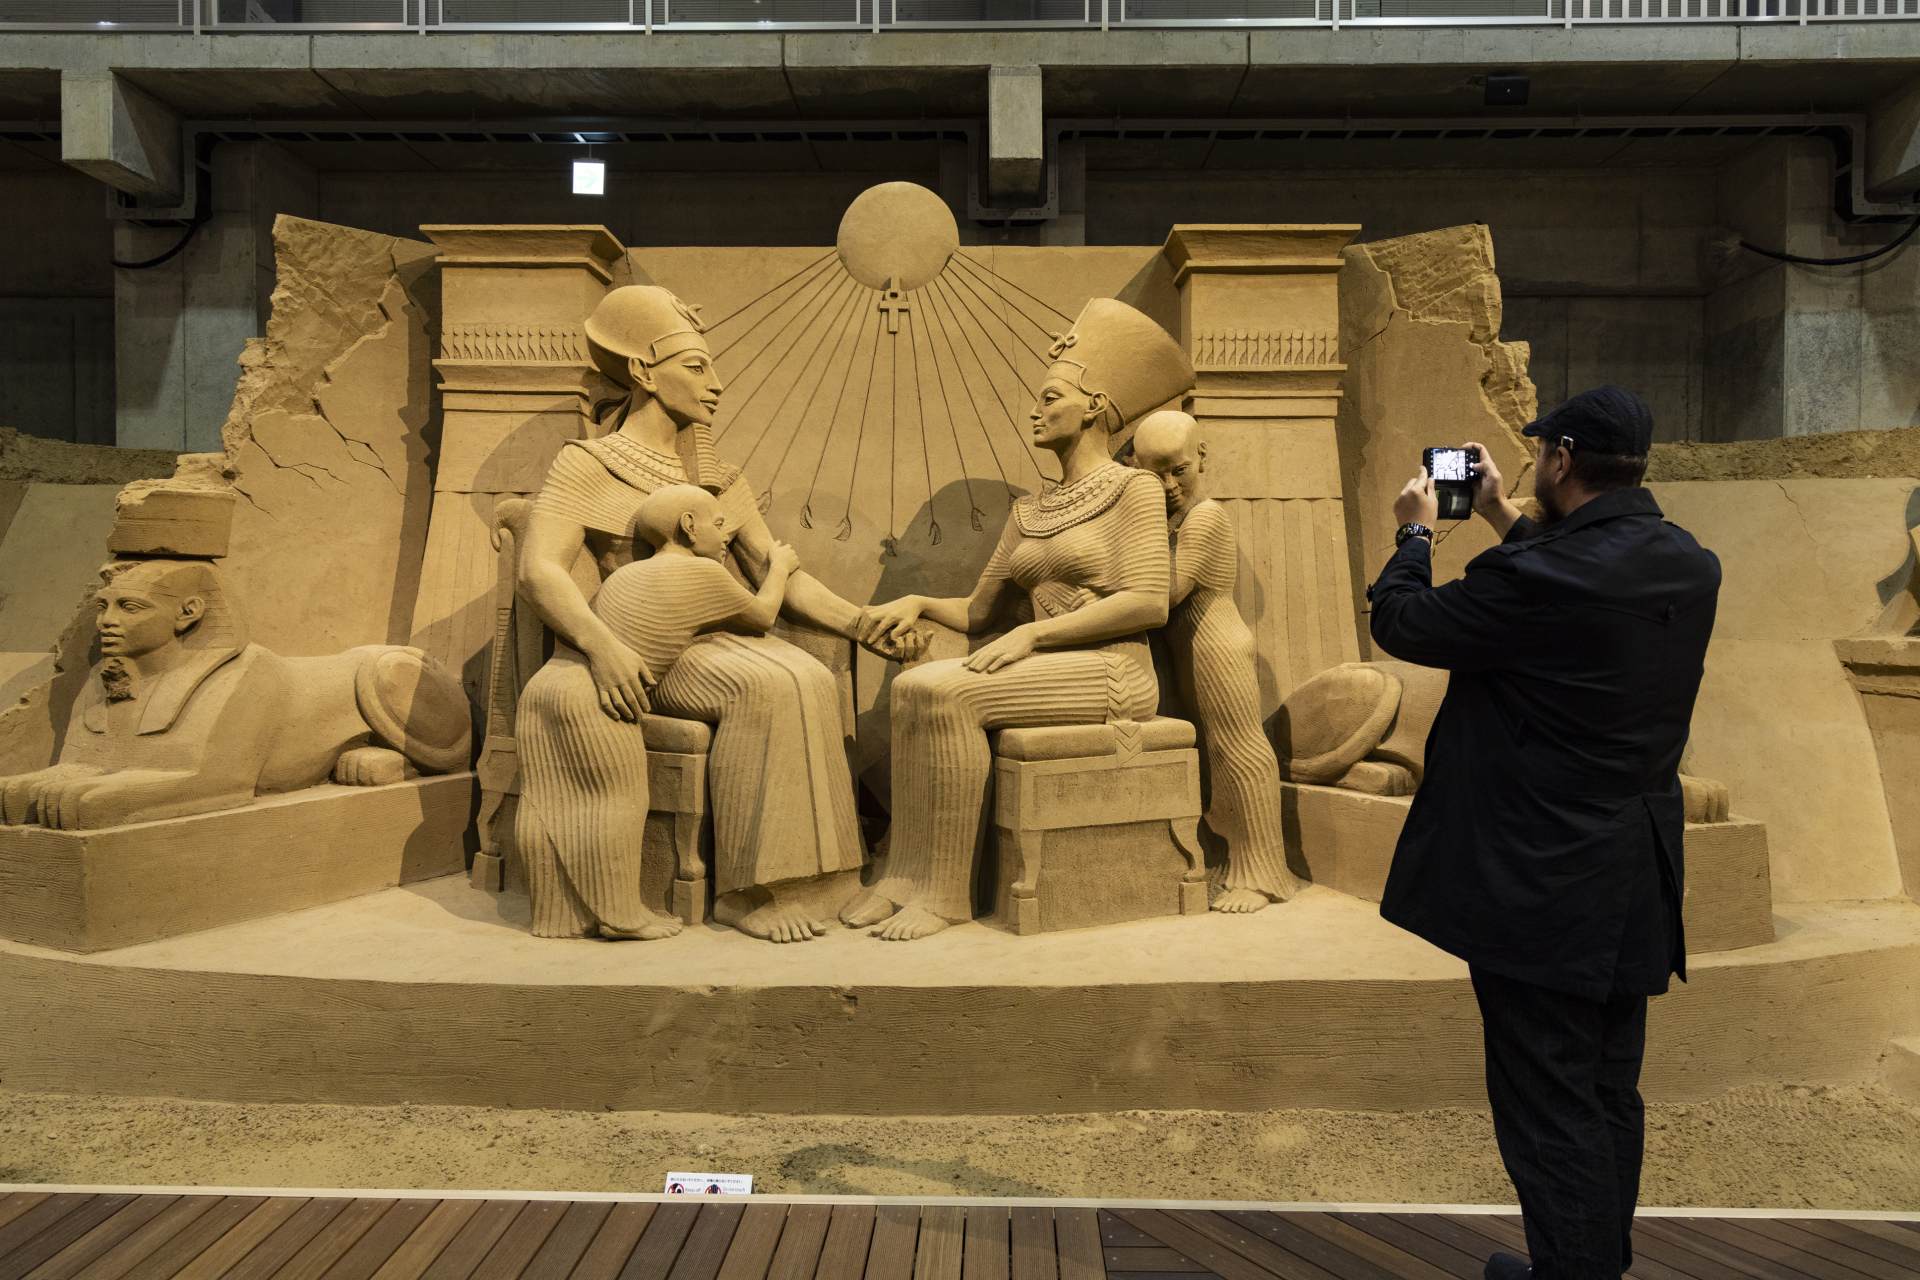 The amount of detail in the sculptures, constructed with just sand, water, and time, is truly breathtaking.